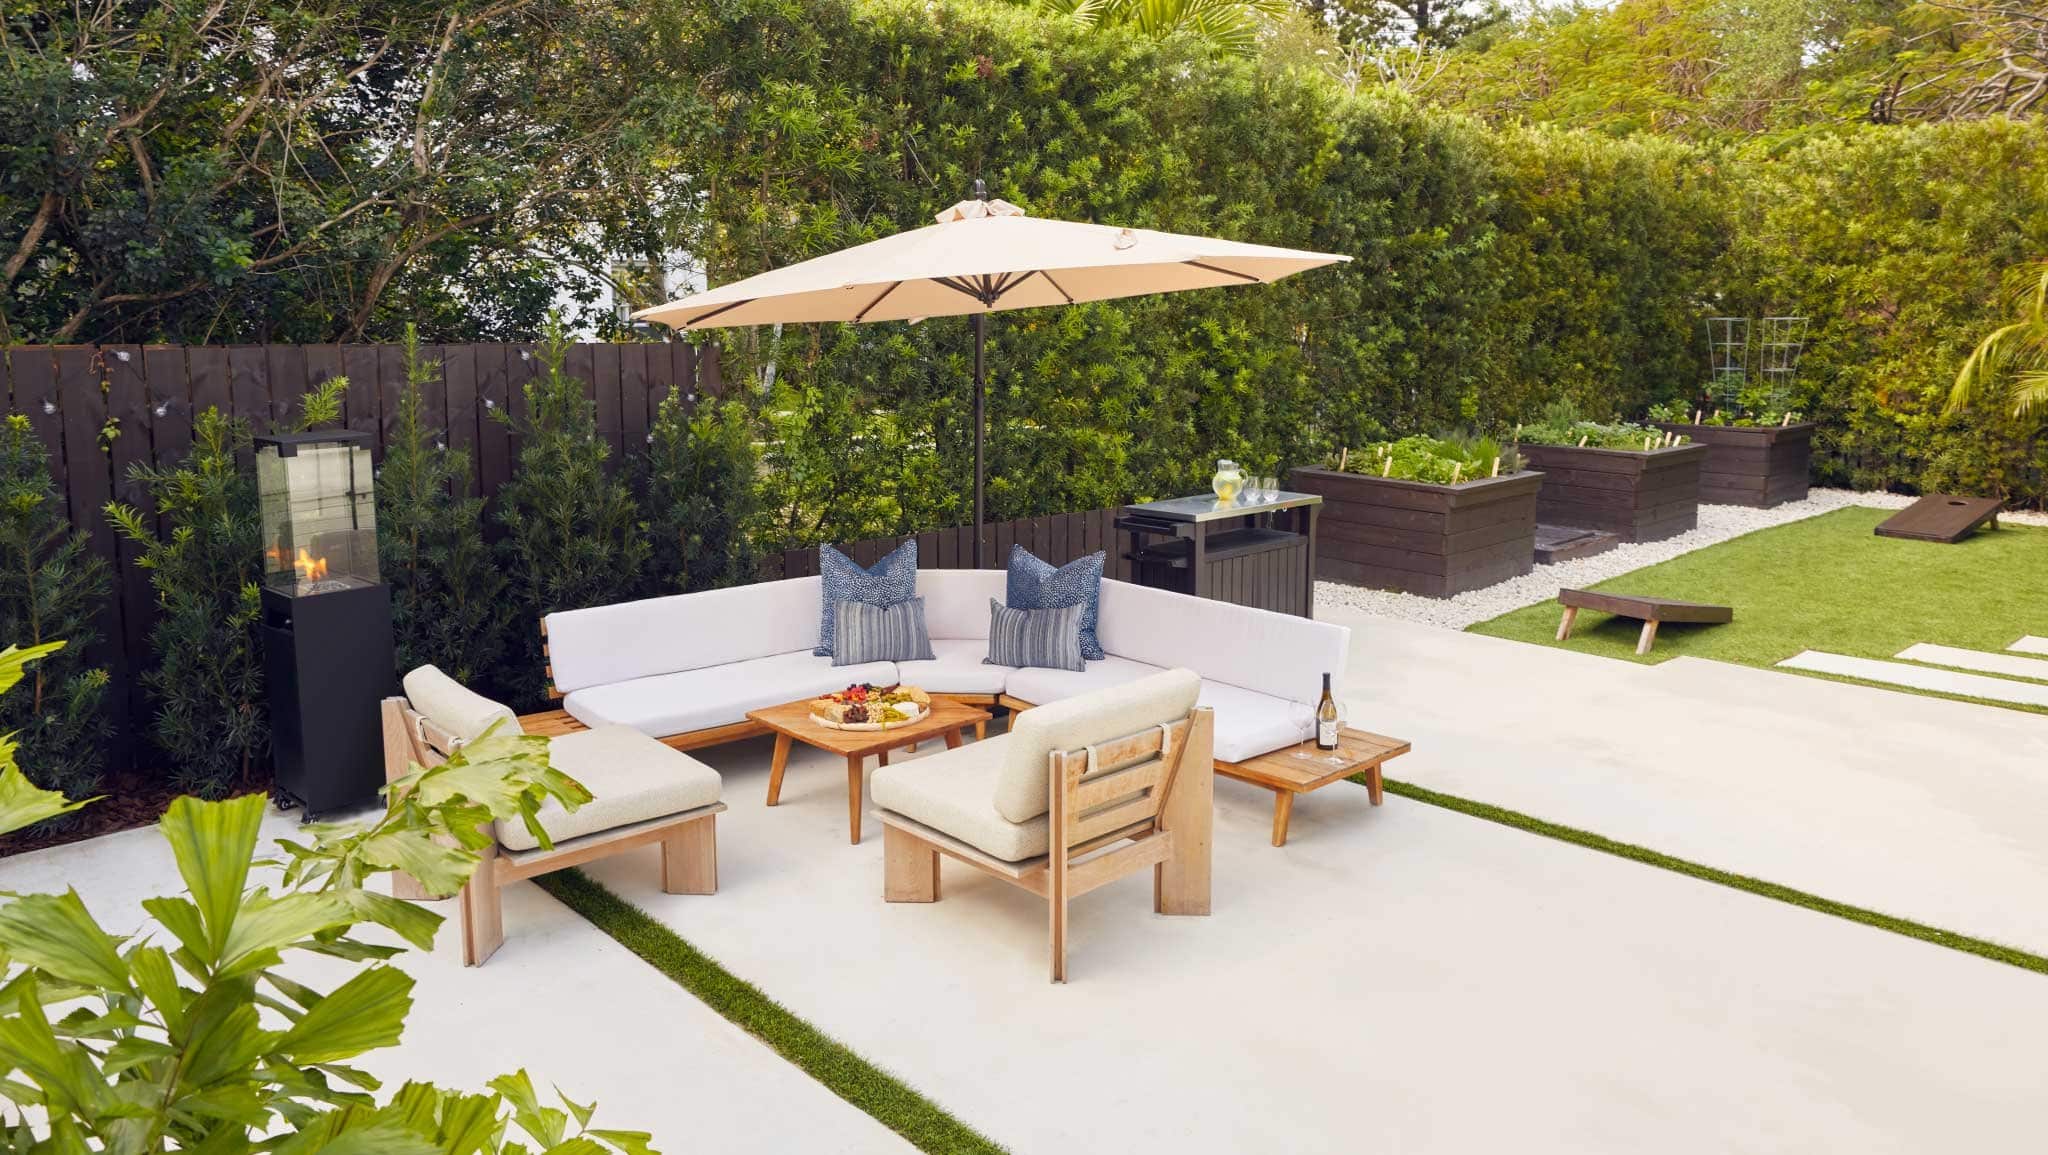 Concrete patio with stylish outdoor lounge furniture and outdoor umbrella